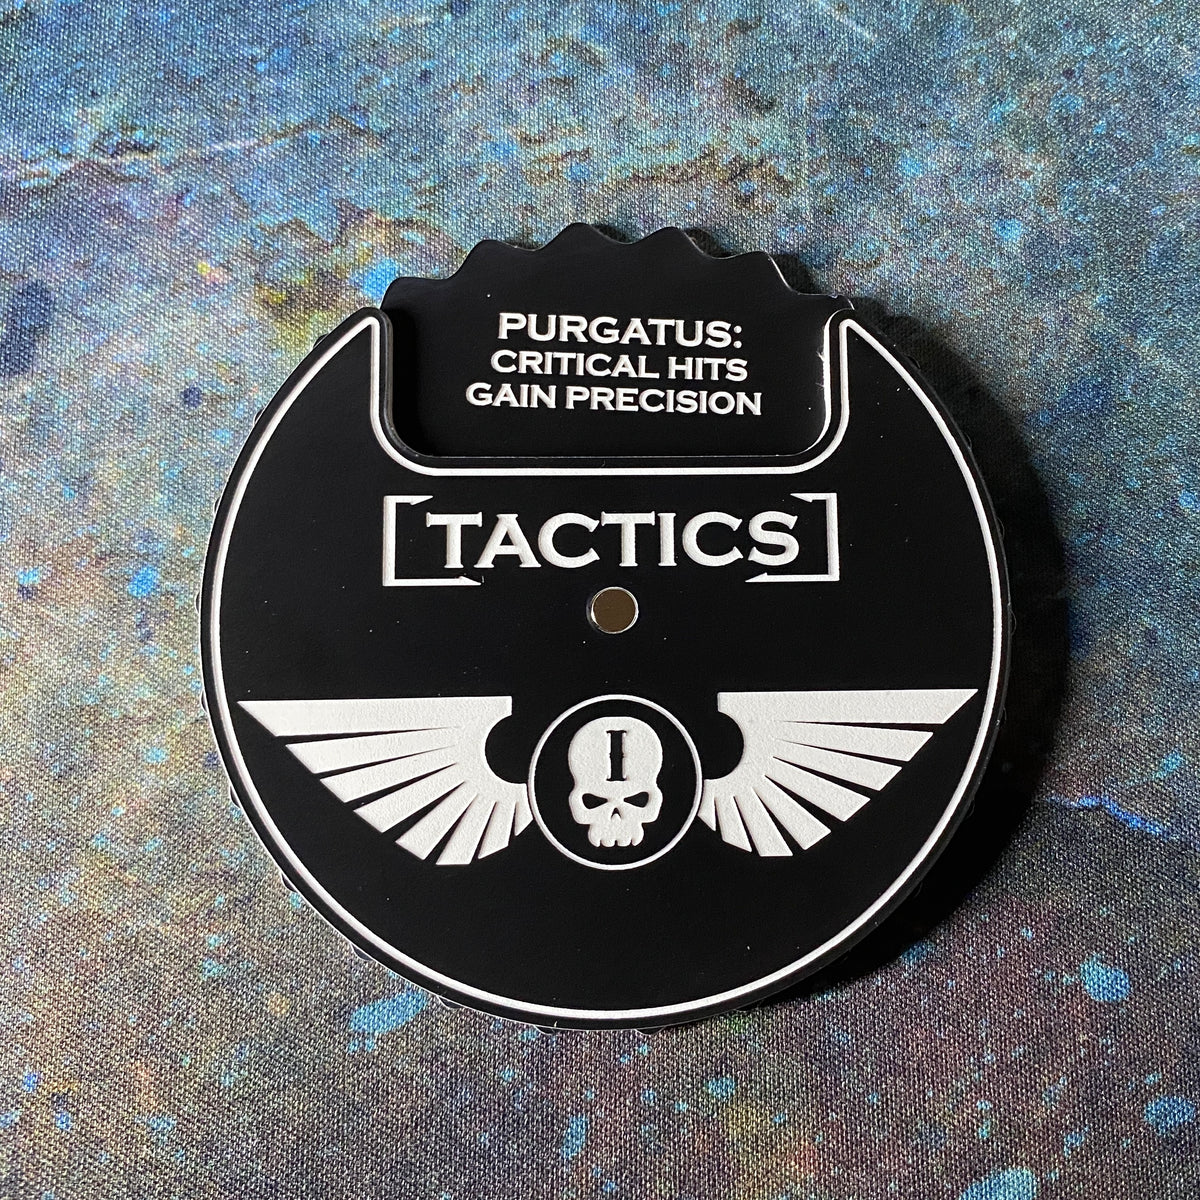 xeno-hunters-magnetic-tactic-tracker-40k-10th-edition-pro-painted-studios